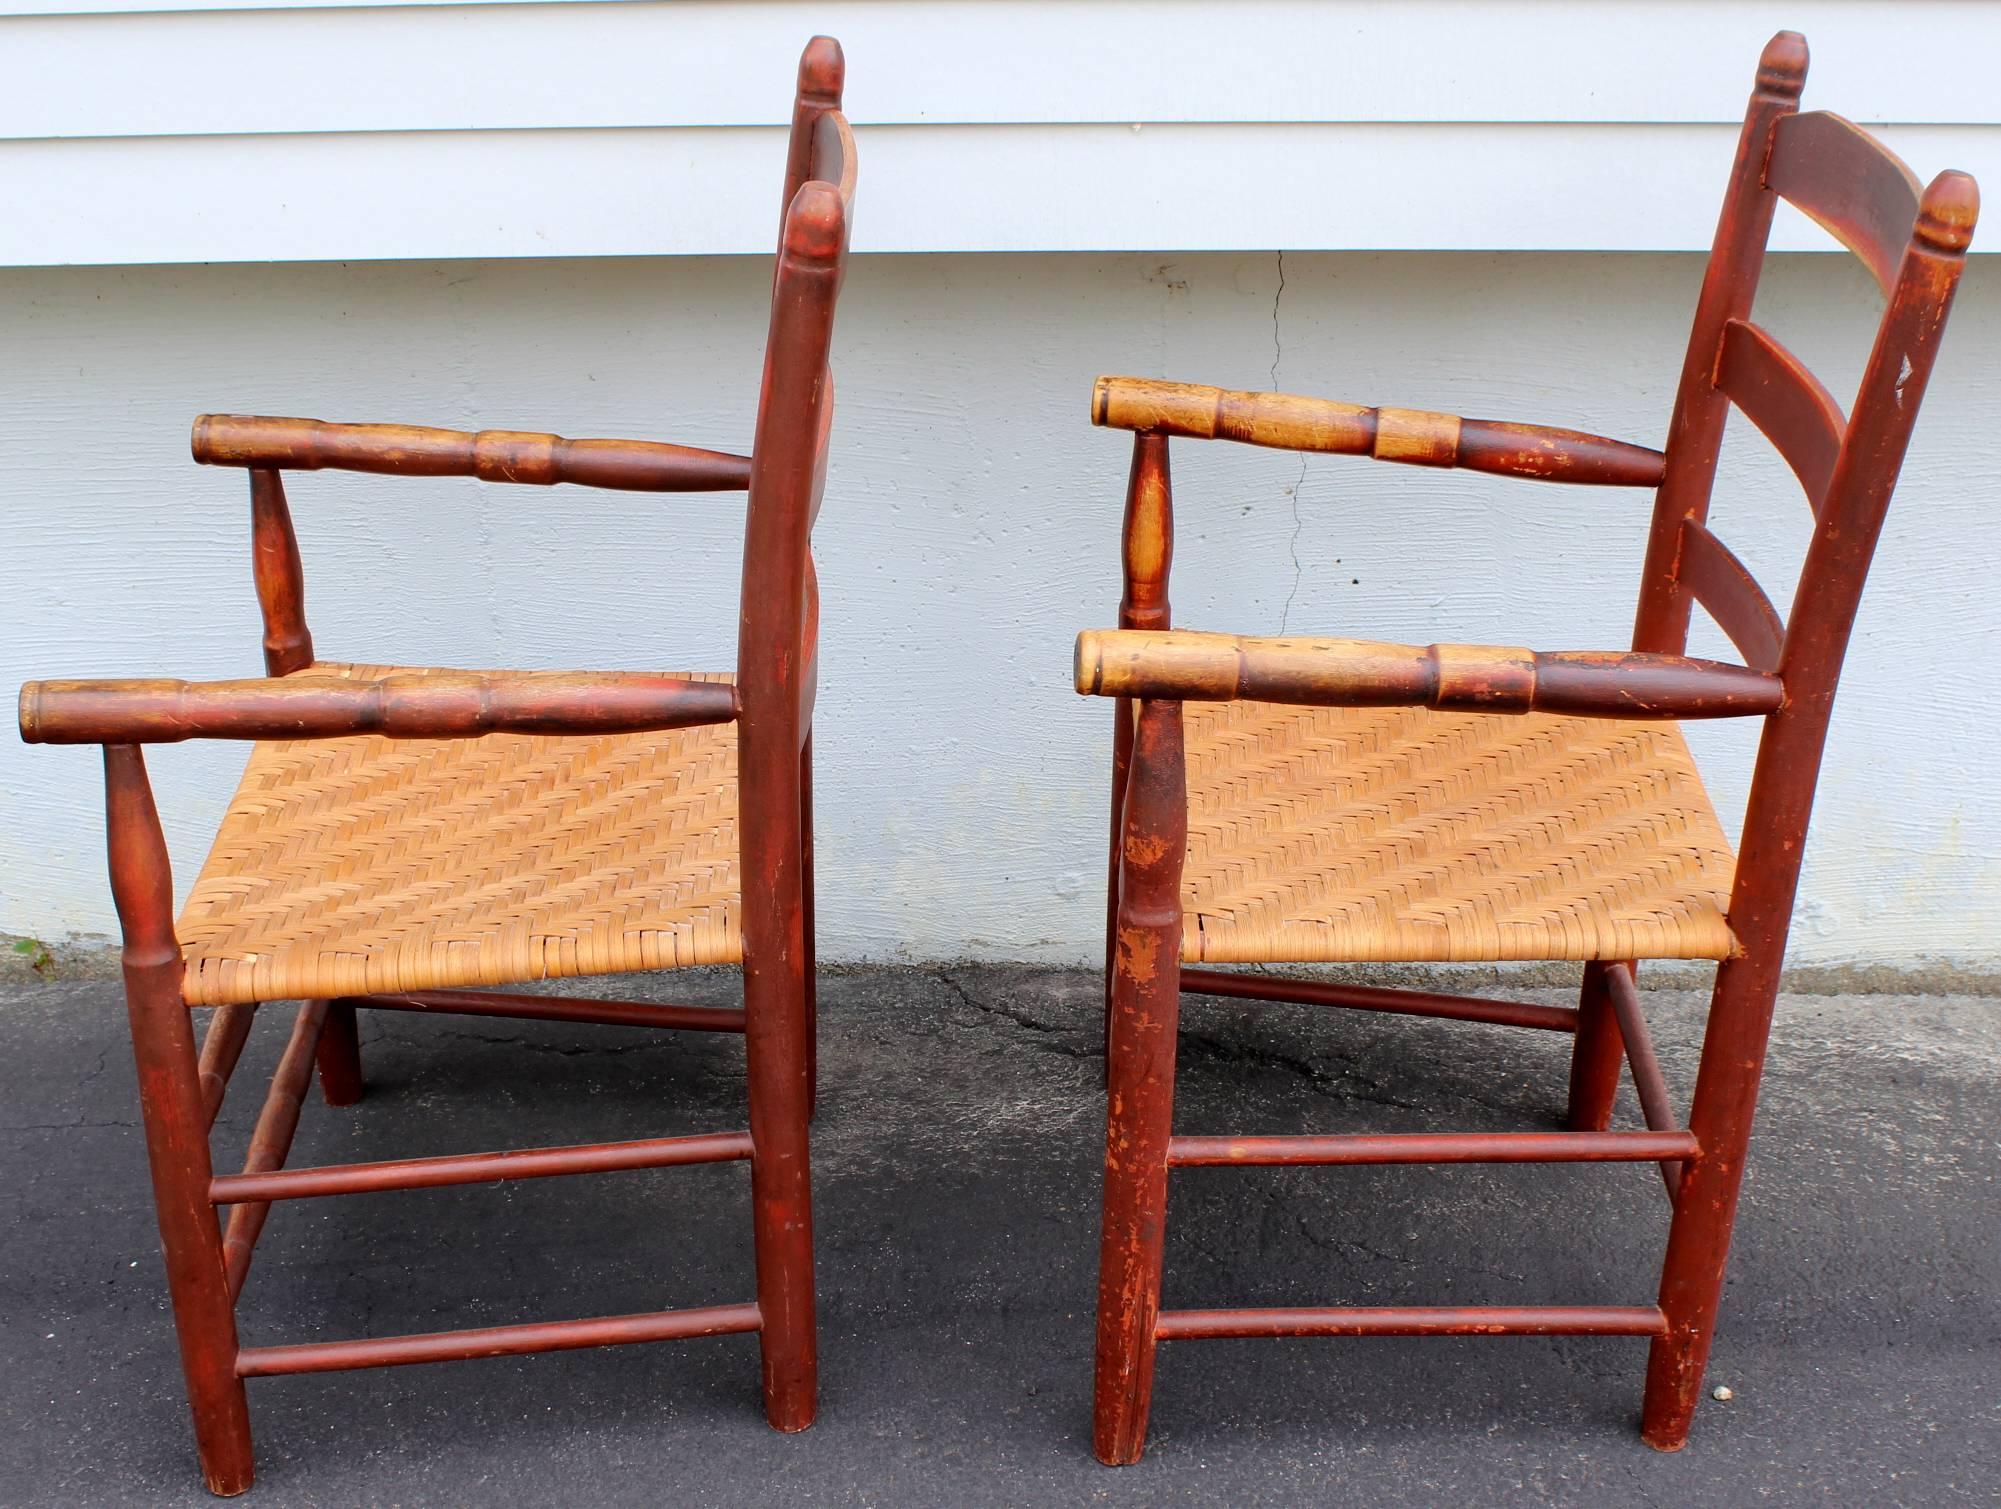 A splendid pair of 19th century country ladder back armchairs in old red finish, with turned arms and front stretchers, and woven split ash seats. Great overall worn red surface finish.